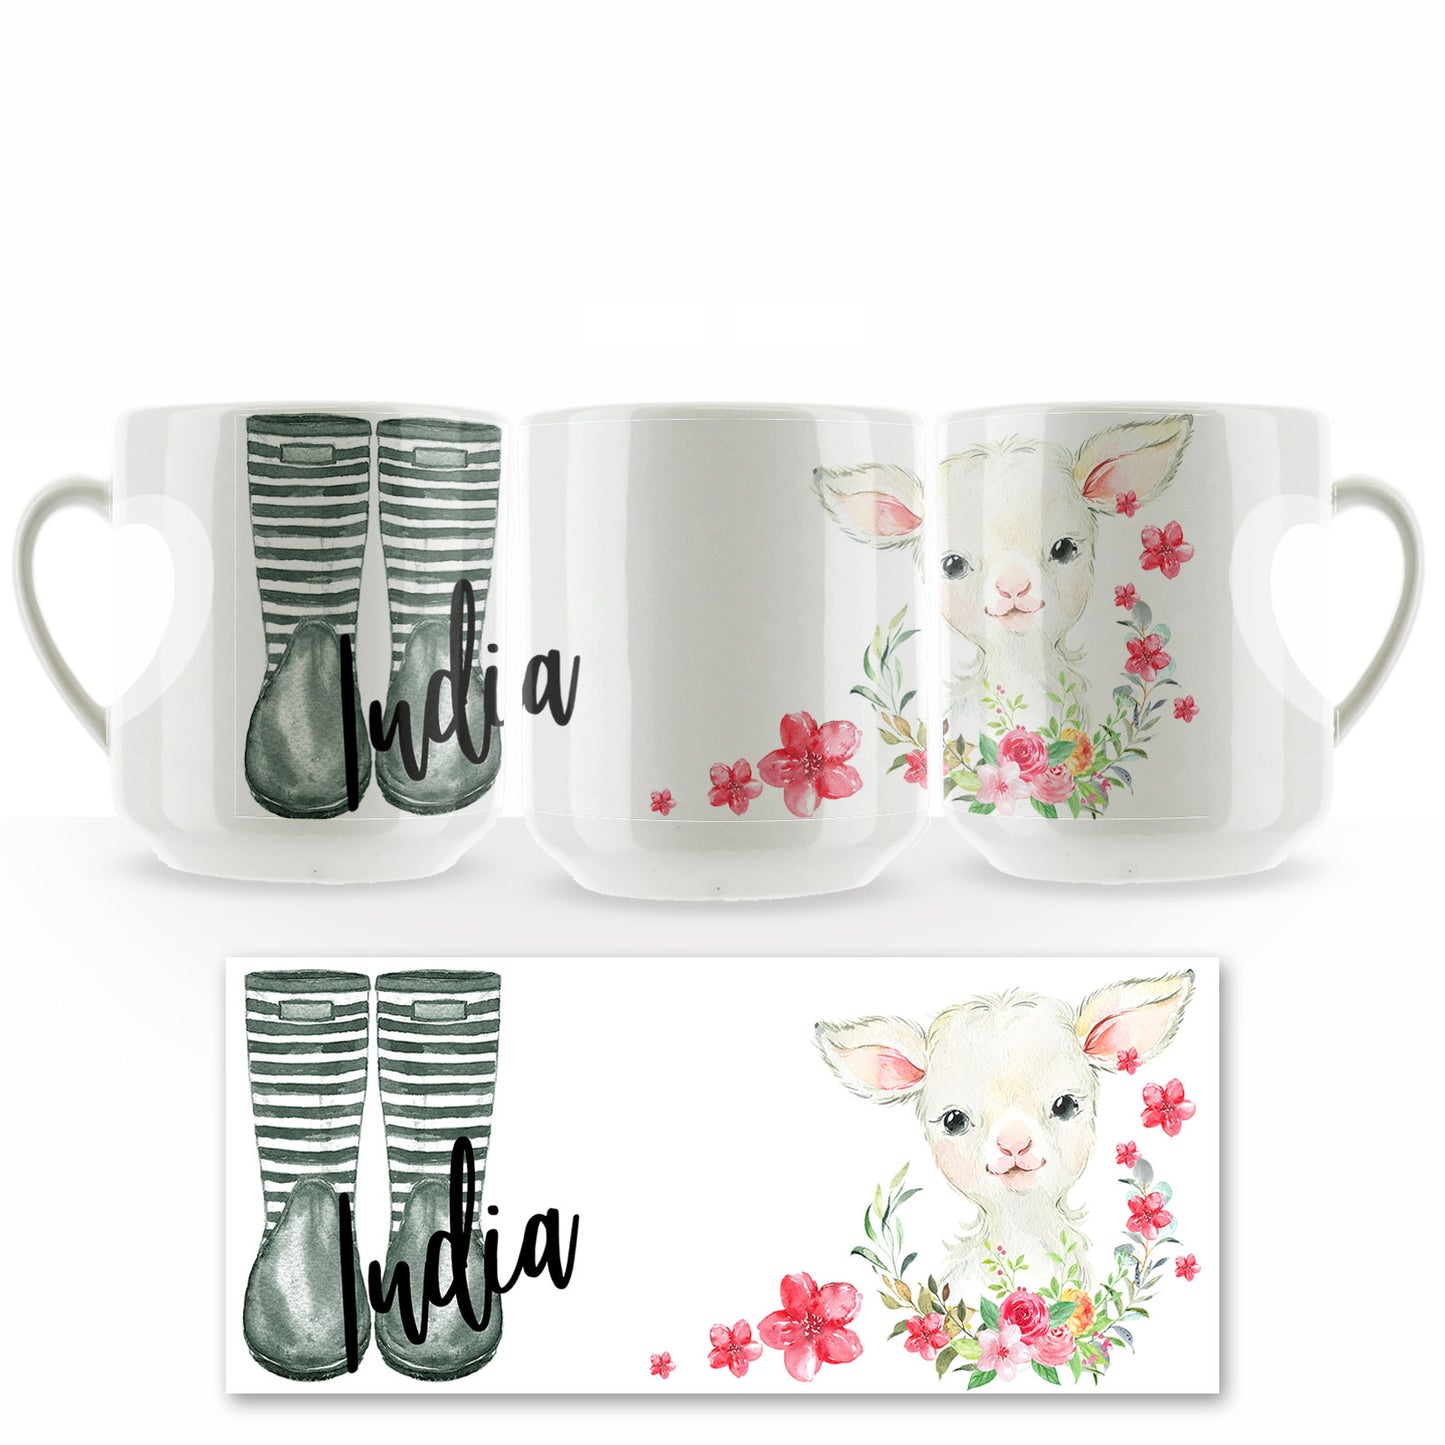 Personalised Mug with Stylish Text and Pink Flower Lamb & Green Striped Wellies